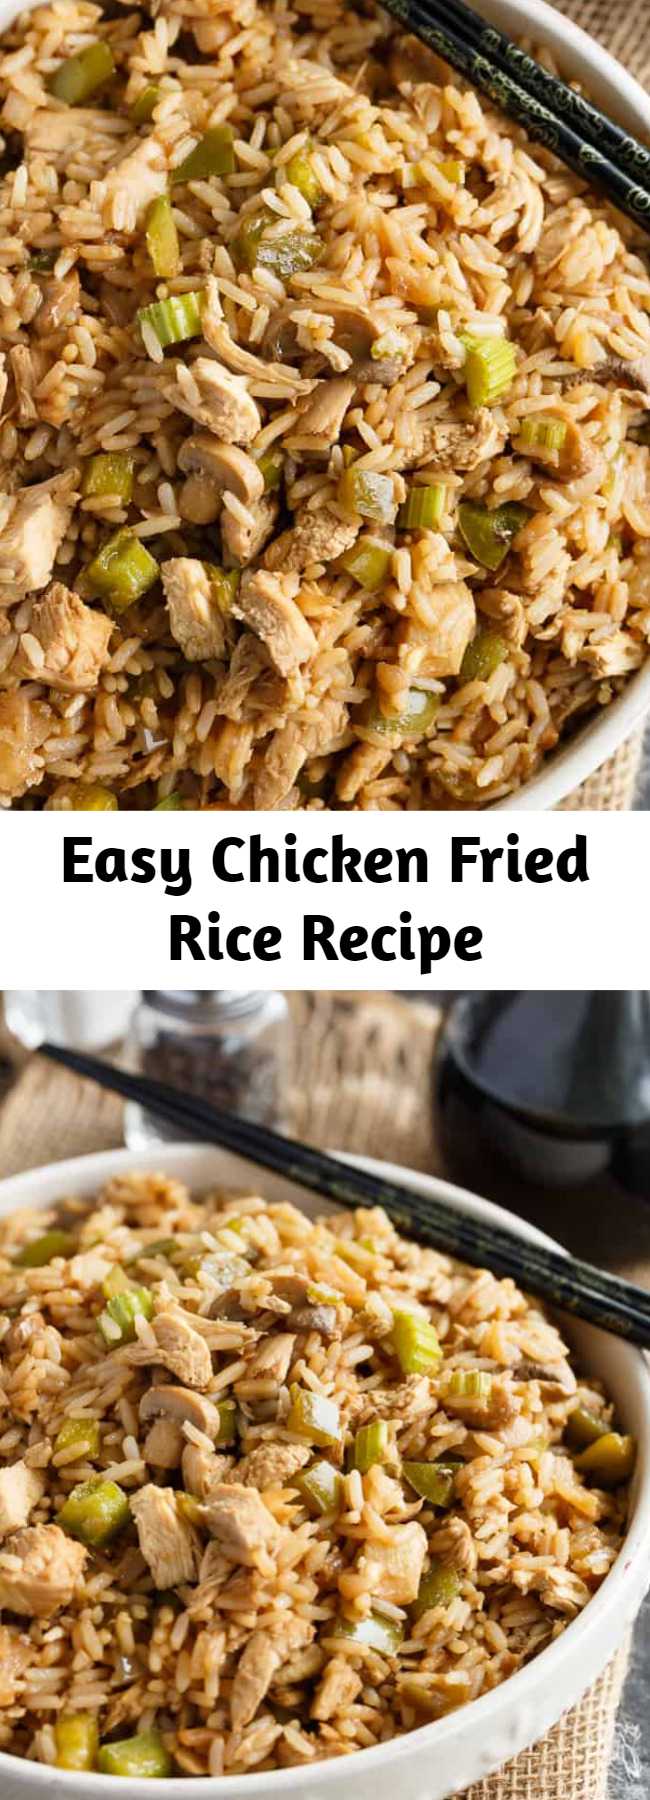 Easy Chicken Fried Rice Recipe - Skip takeout and make homemade Chicken Fried Rice! Tender rice that is loaded with veggies, spices, and, of course, pieces of chicken in every bite. A must-make rice recipe. This is a recipe that the entire family would enjoy AND it’s easy (and inexpensive) to make. You can make it last for an extra day or two with leftovers!